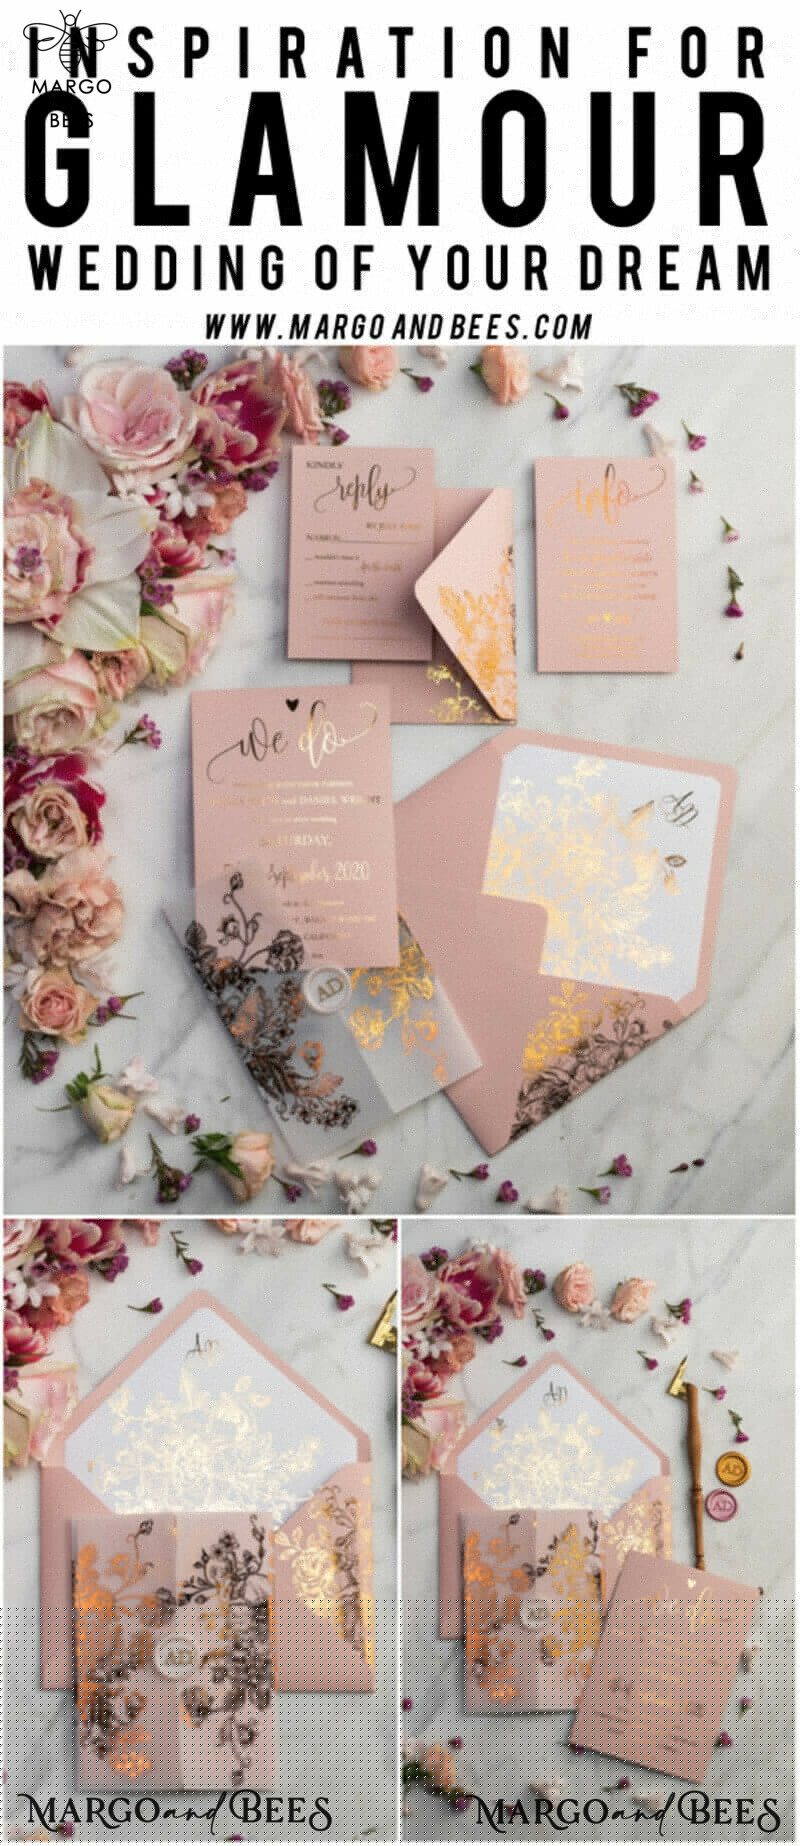 Luxury Vellum Gold Foil Wedding Invitations: Elegant Blush Pink Invitation Suite with Glamour Wedding Cards and Golden Shine-57